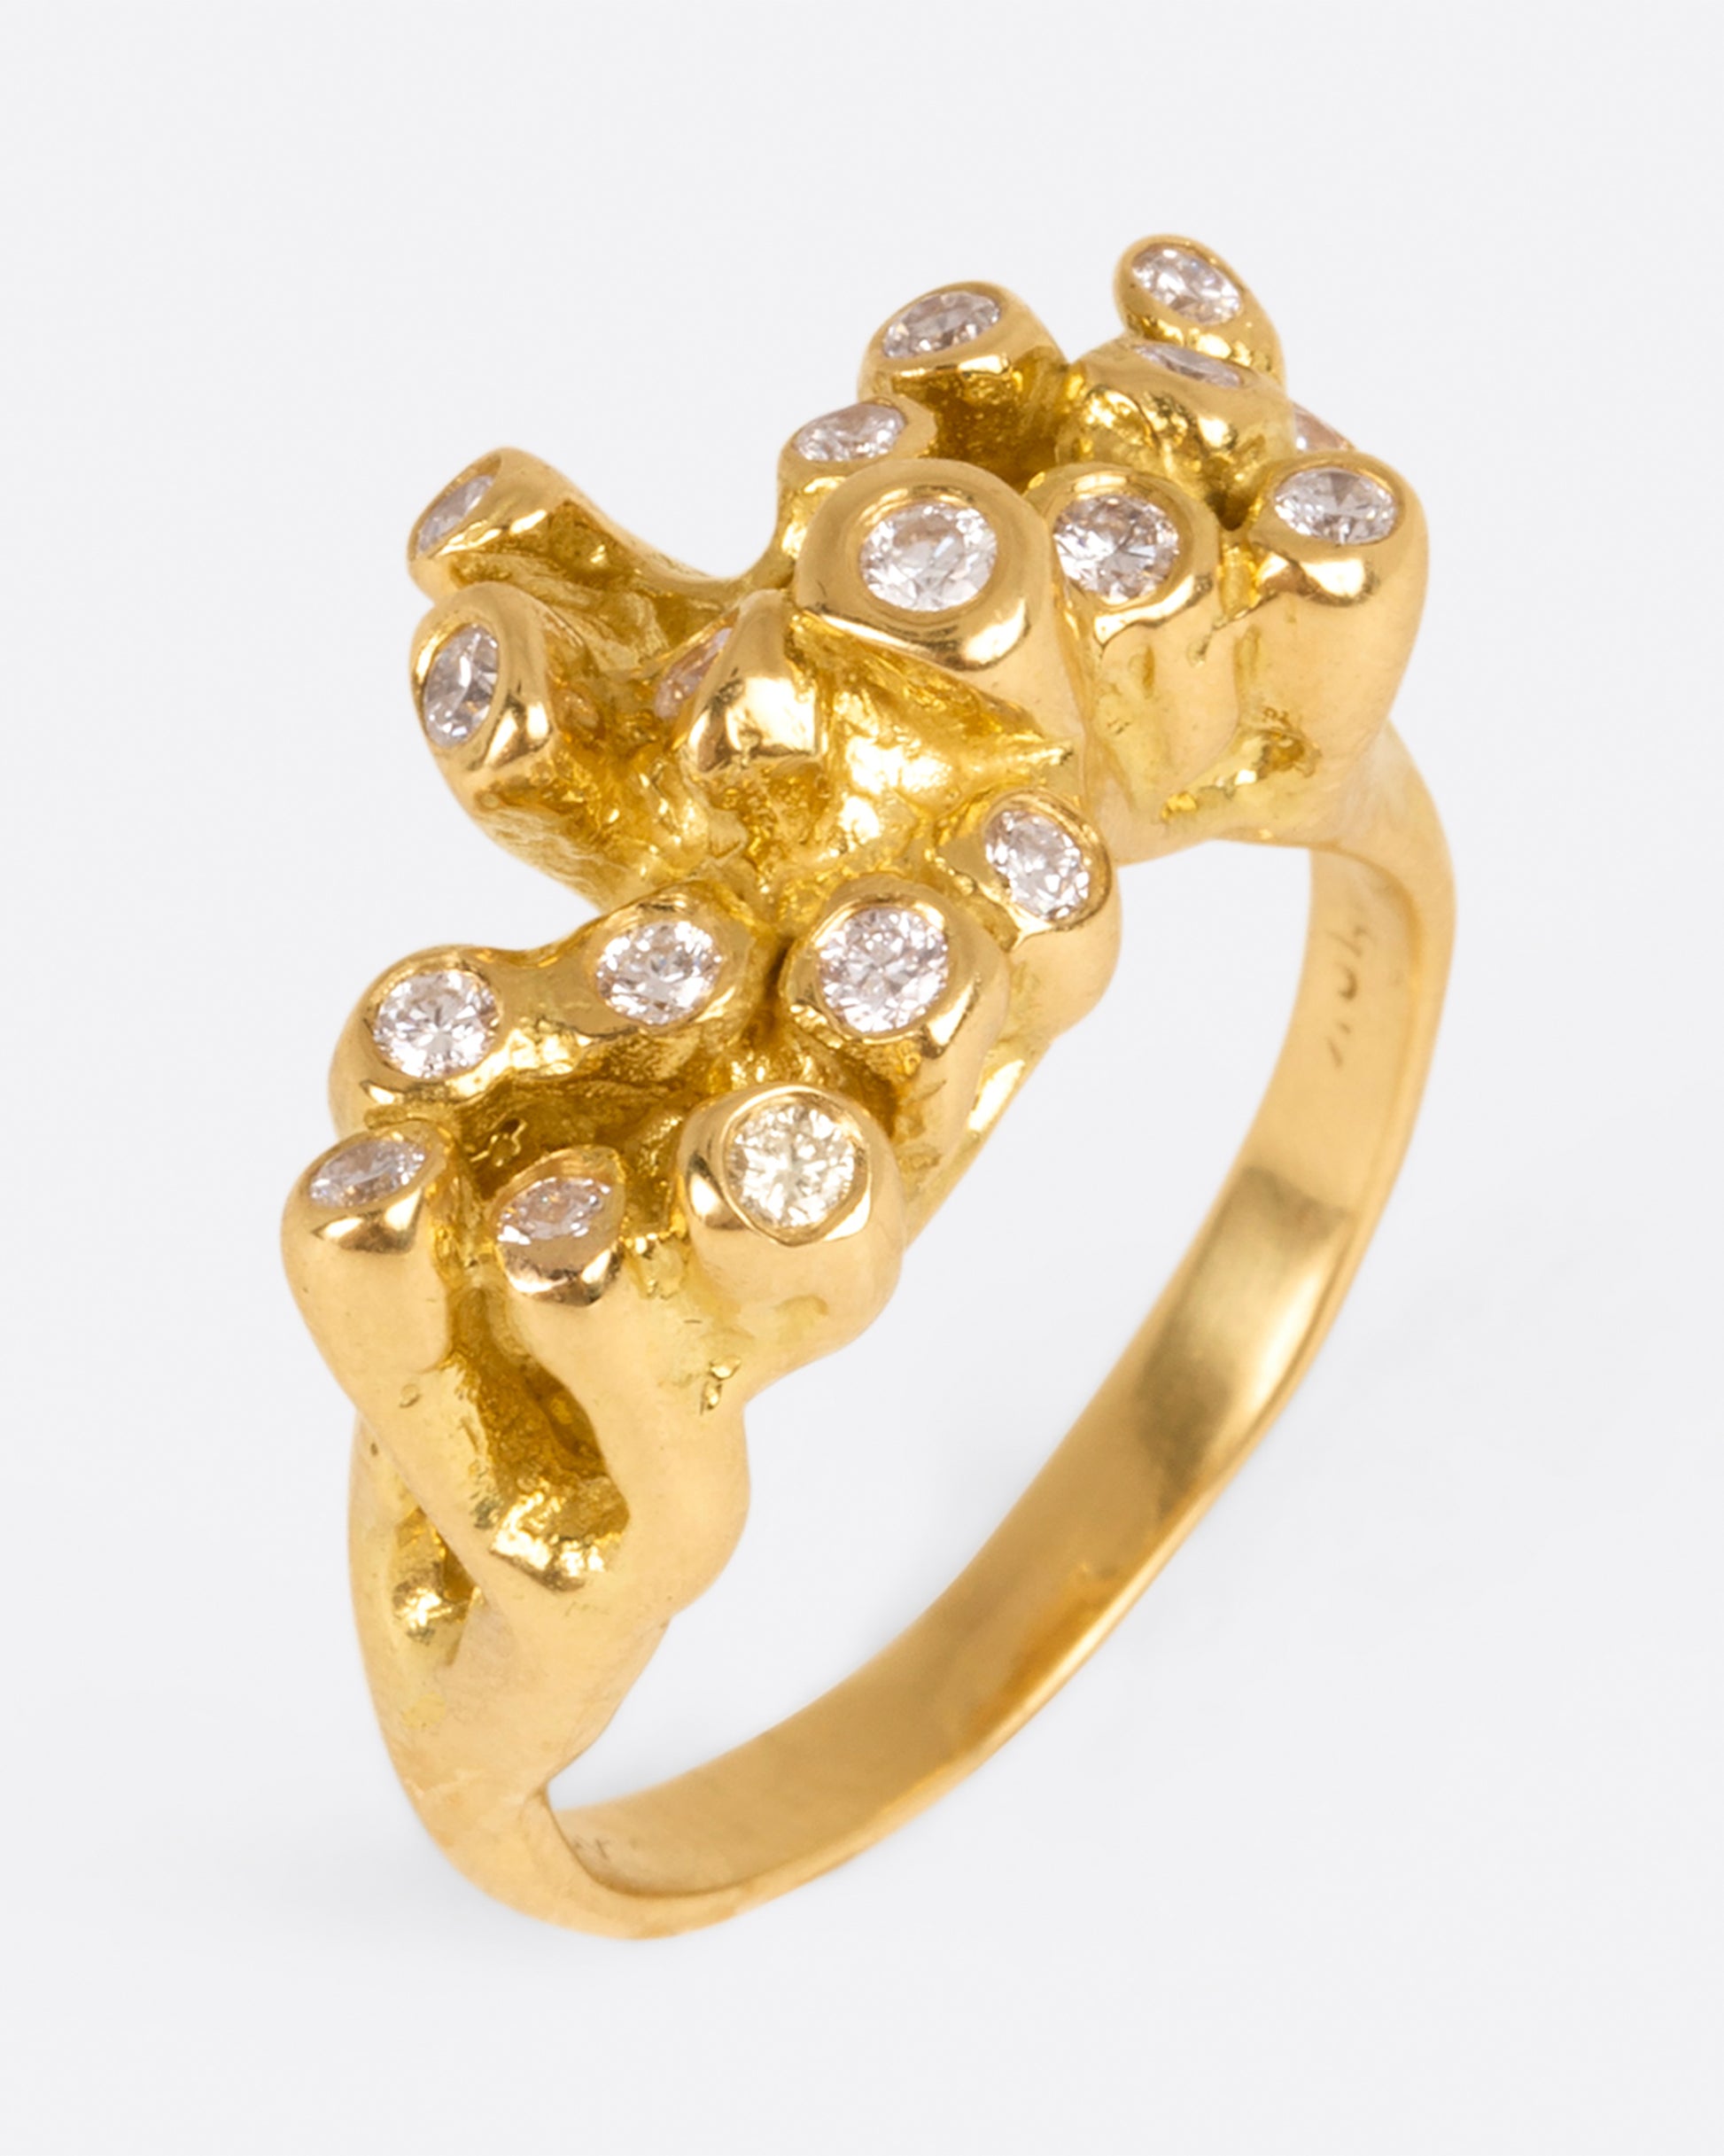 A yellow gold ring with sea anemone tentacles, dotted with diamonds, shown from above.